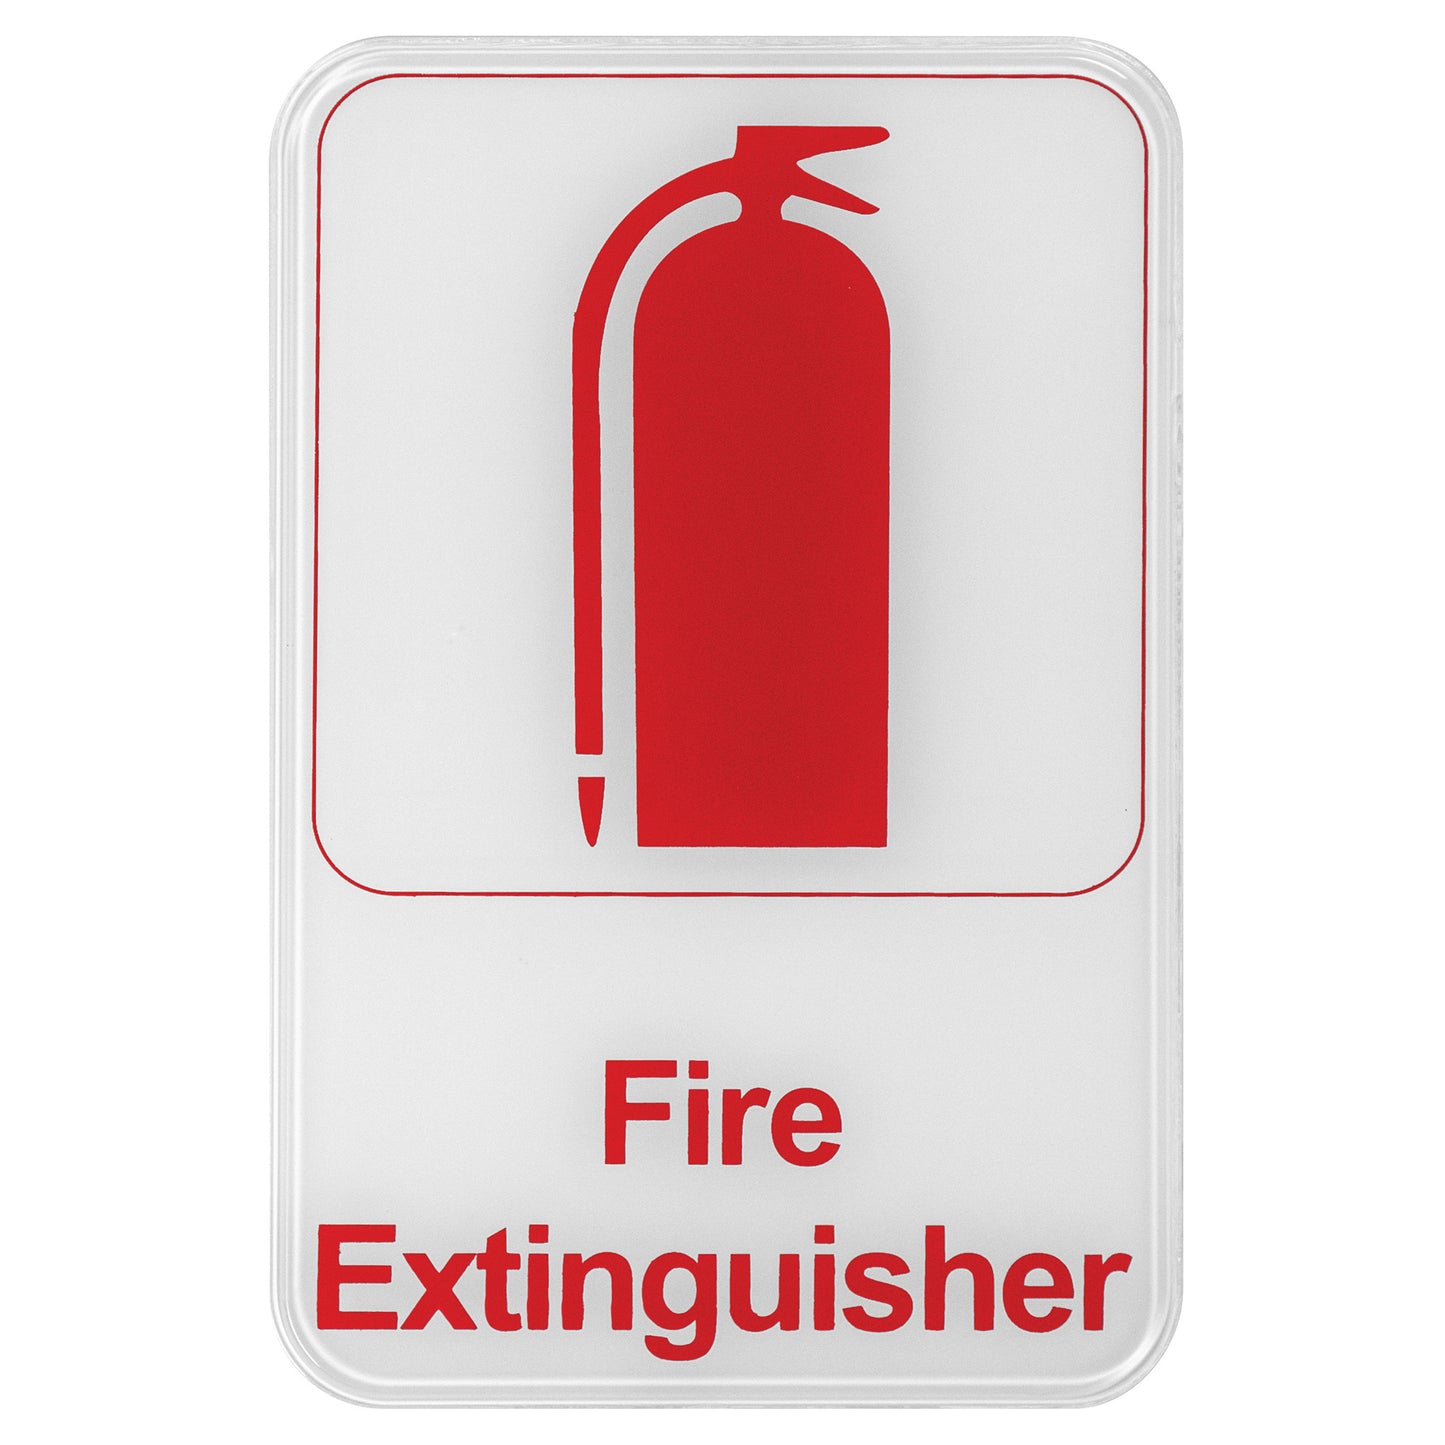 SGN-682W - Information Sign, 6"W x 9"H - Fire Extinguisher